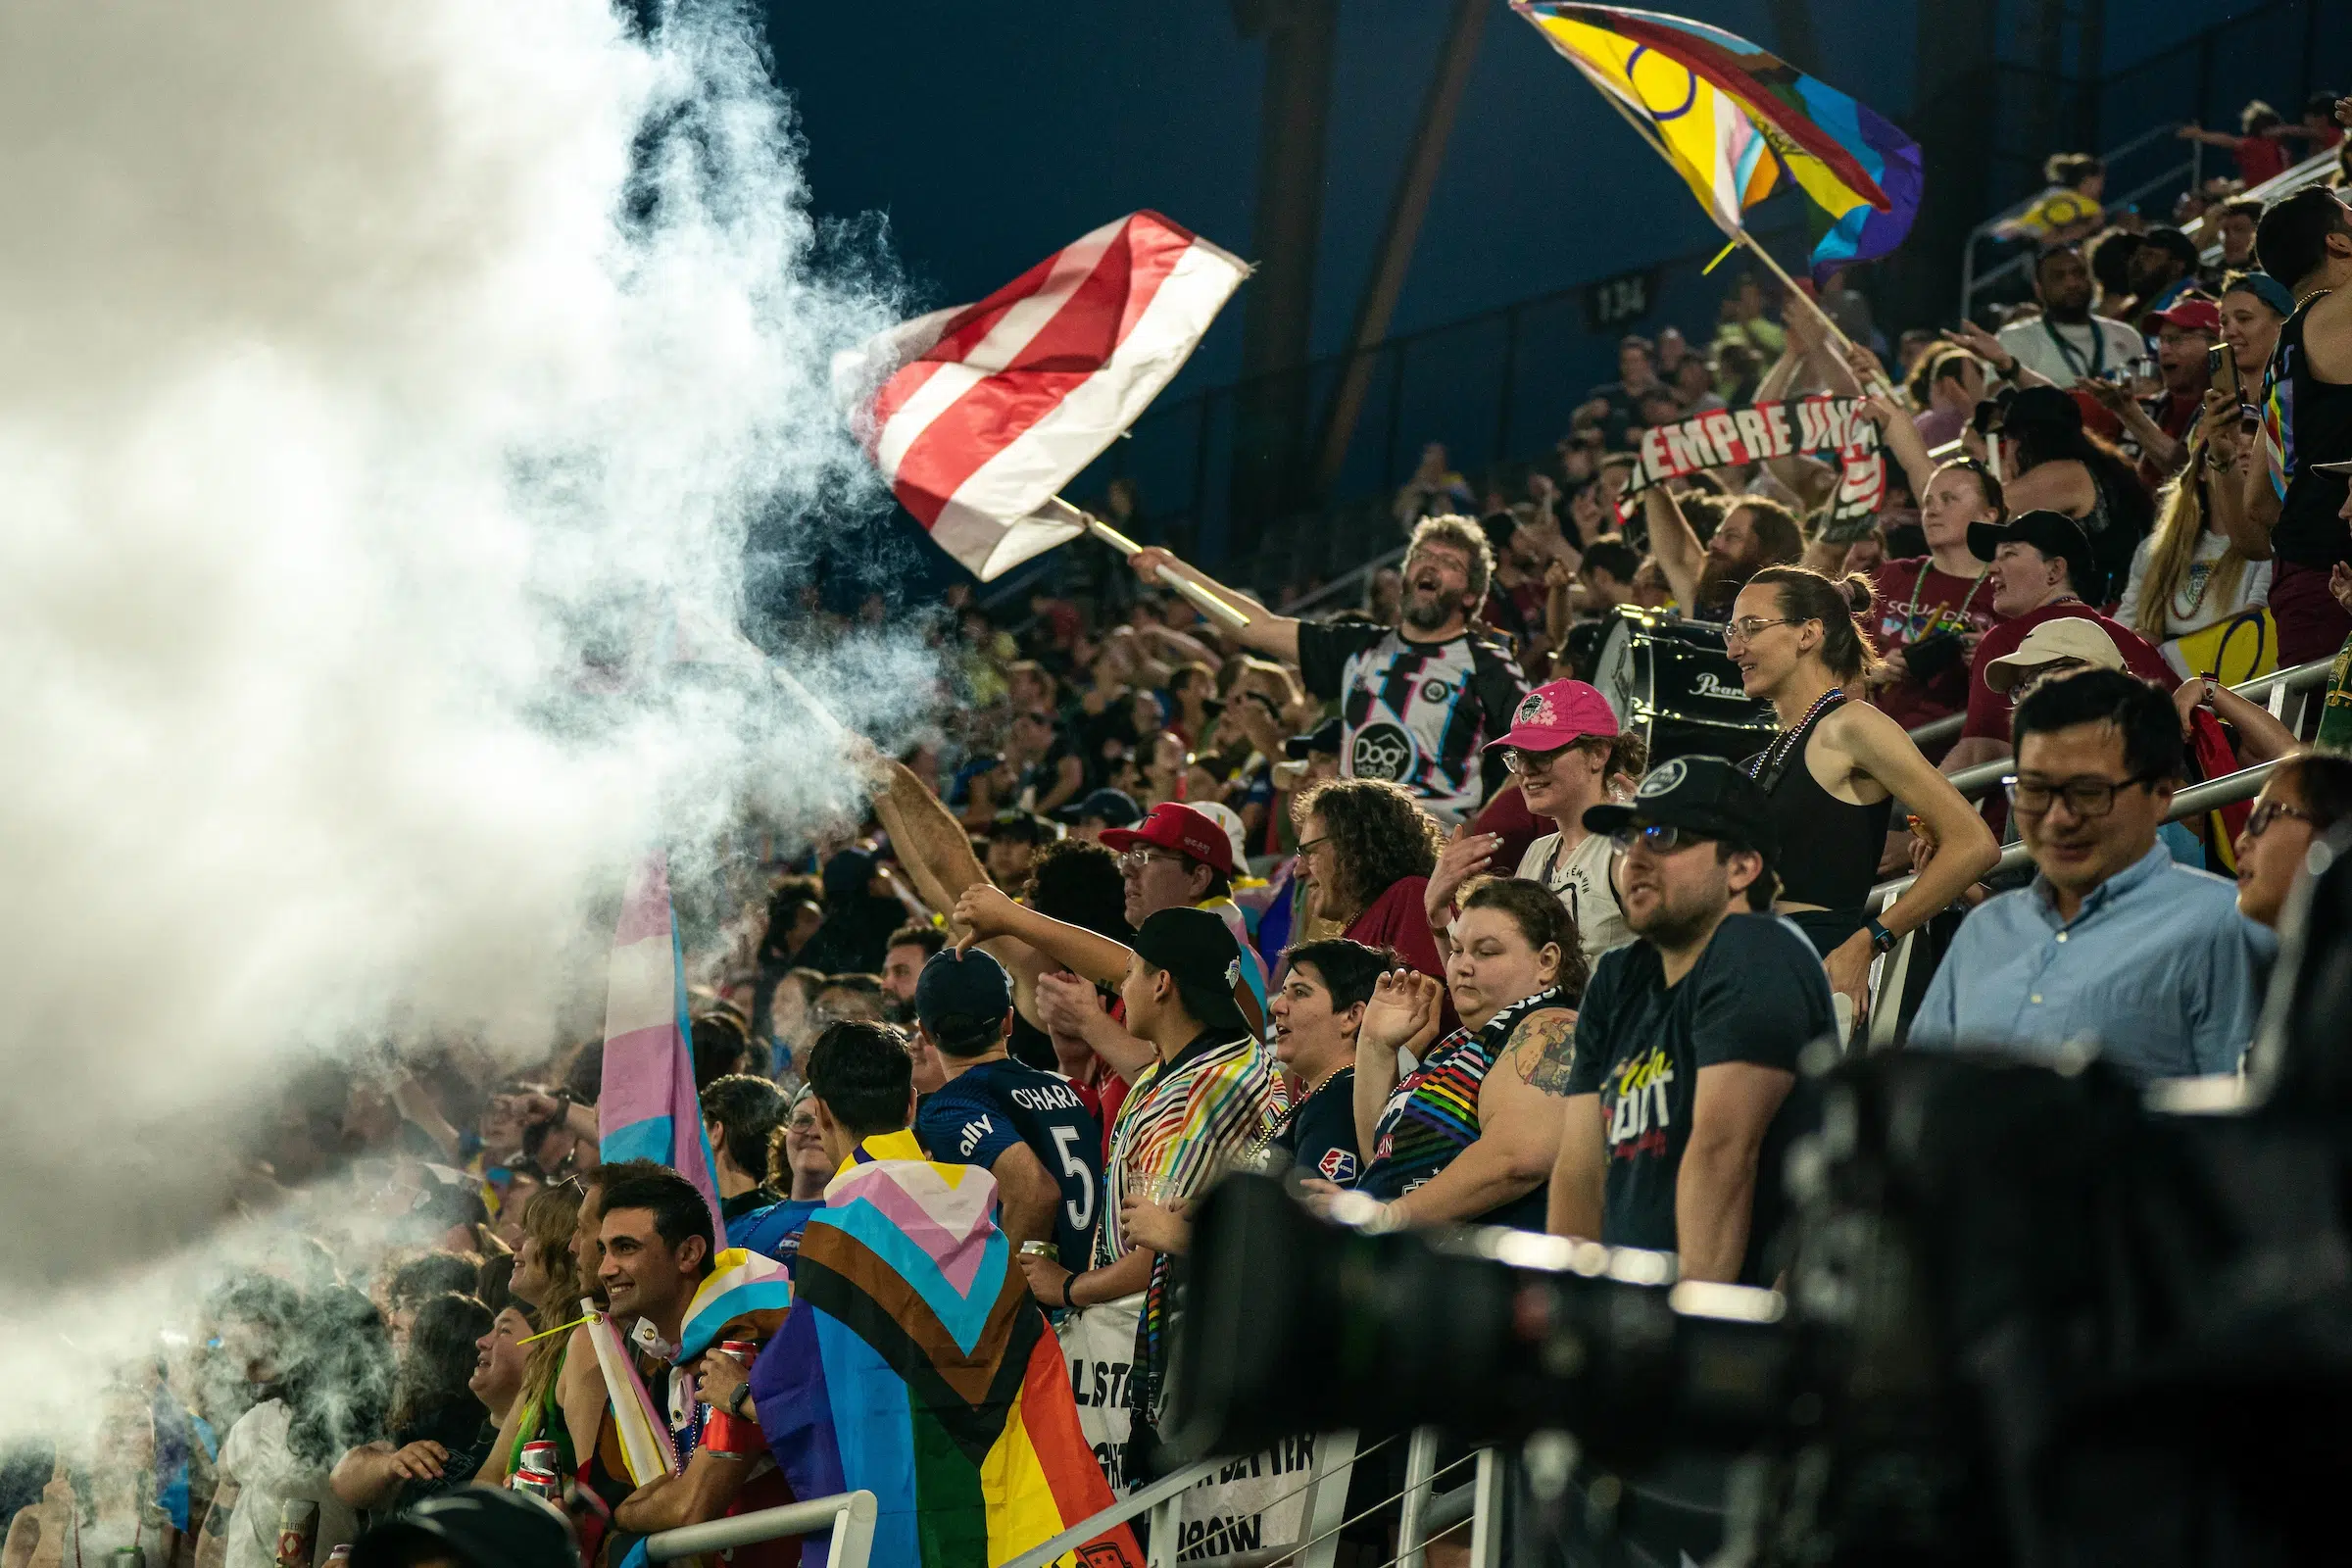 Rainbow flags and a DC flag are waved above a large group of fans as smoke machines release vapor.